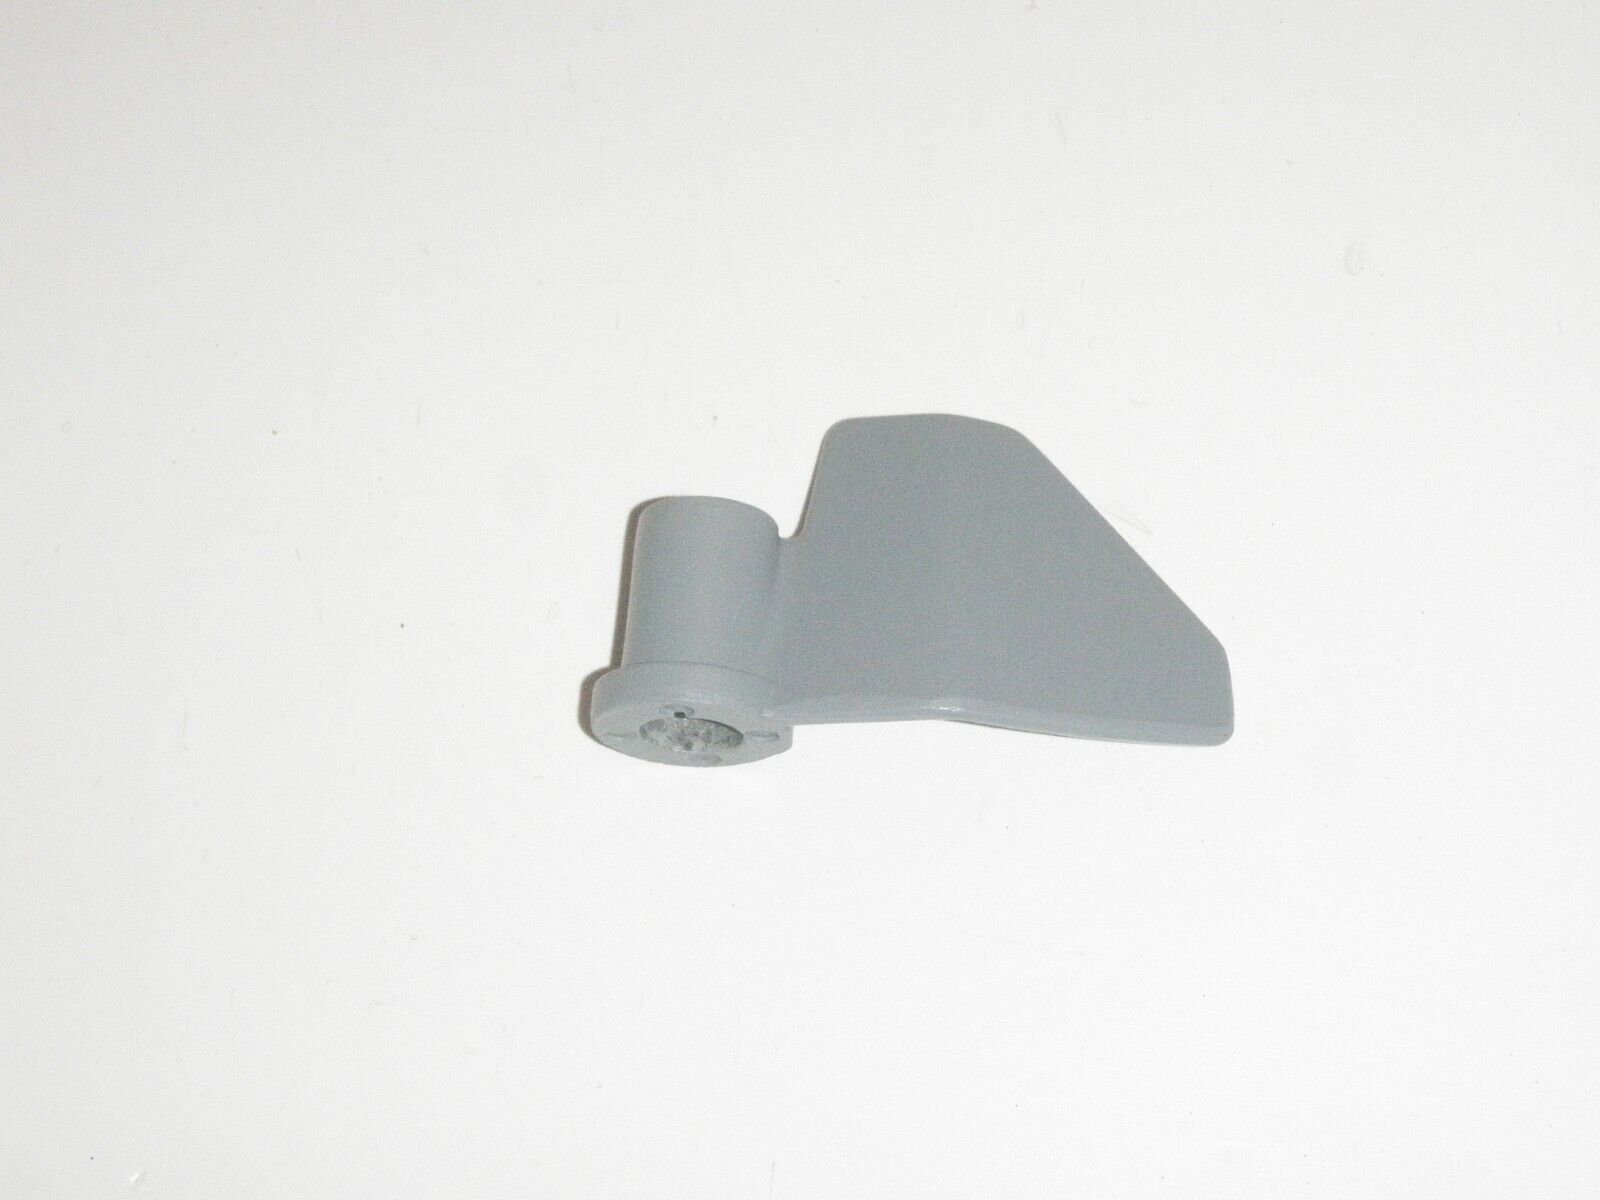 OEM Paddle for Toastmaster Bread Maker Machine Model TBR2 only - $28.41